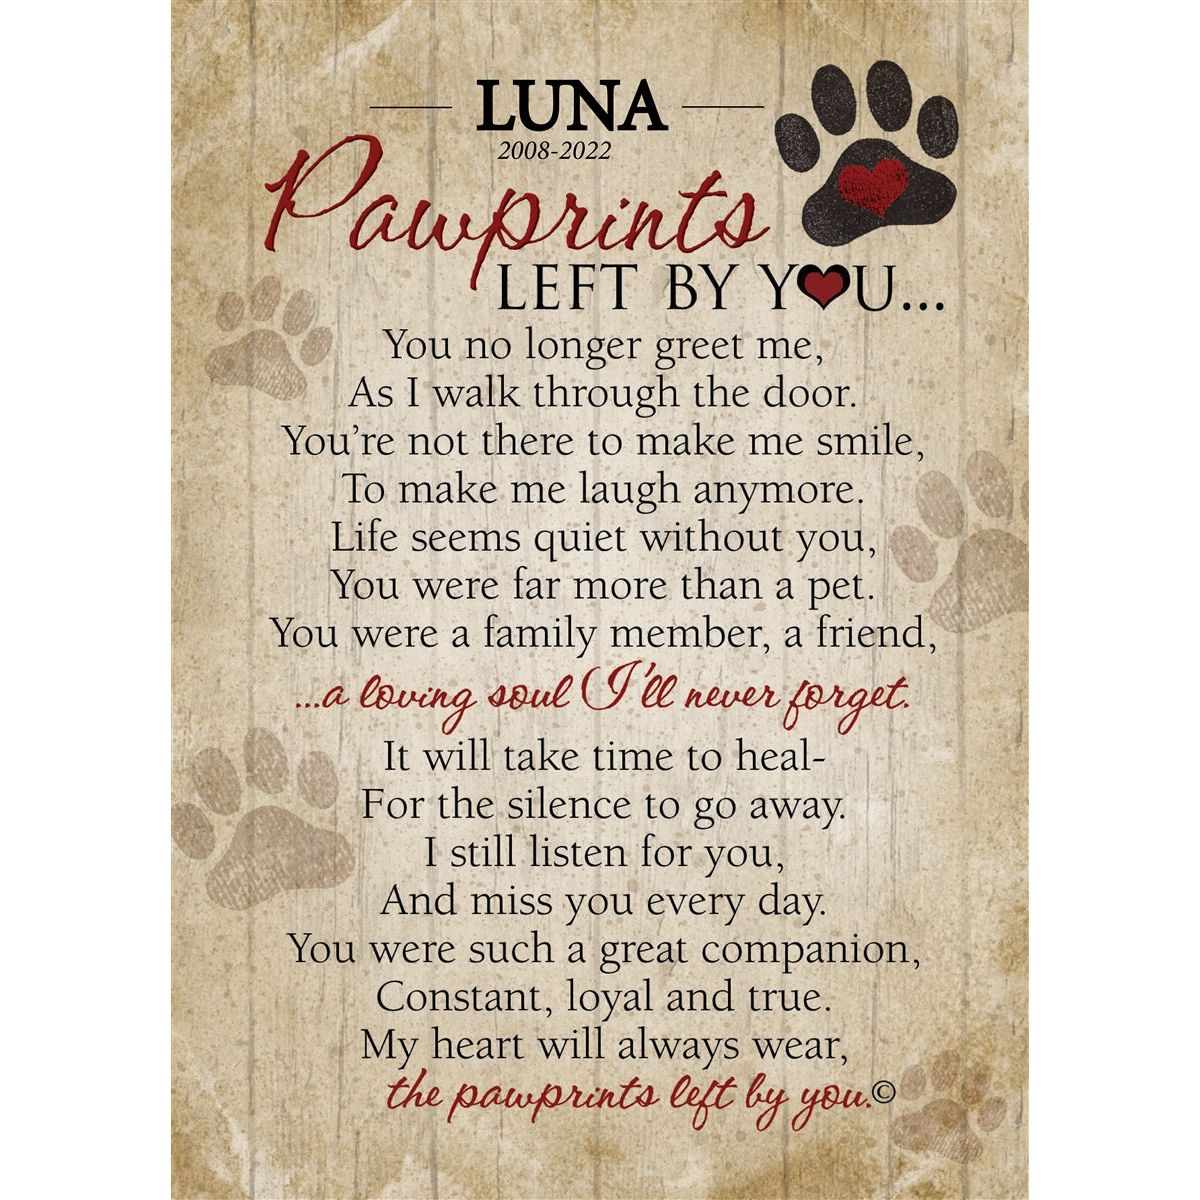 Personalized Pawprints Pet Loss Memorial Frame: Pawprints Left by You Dog